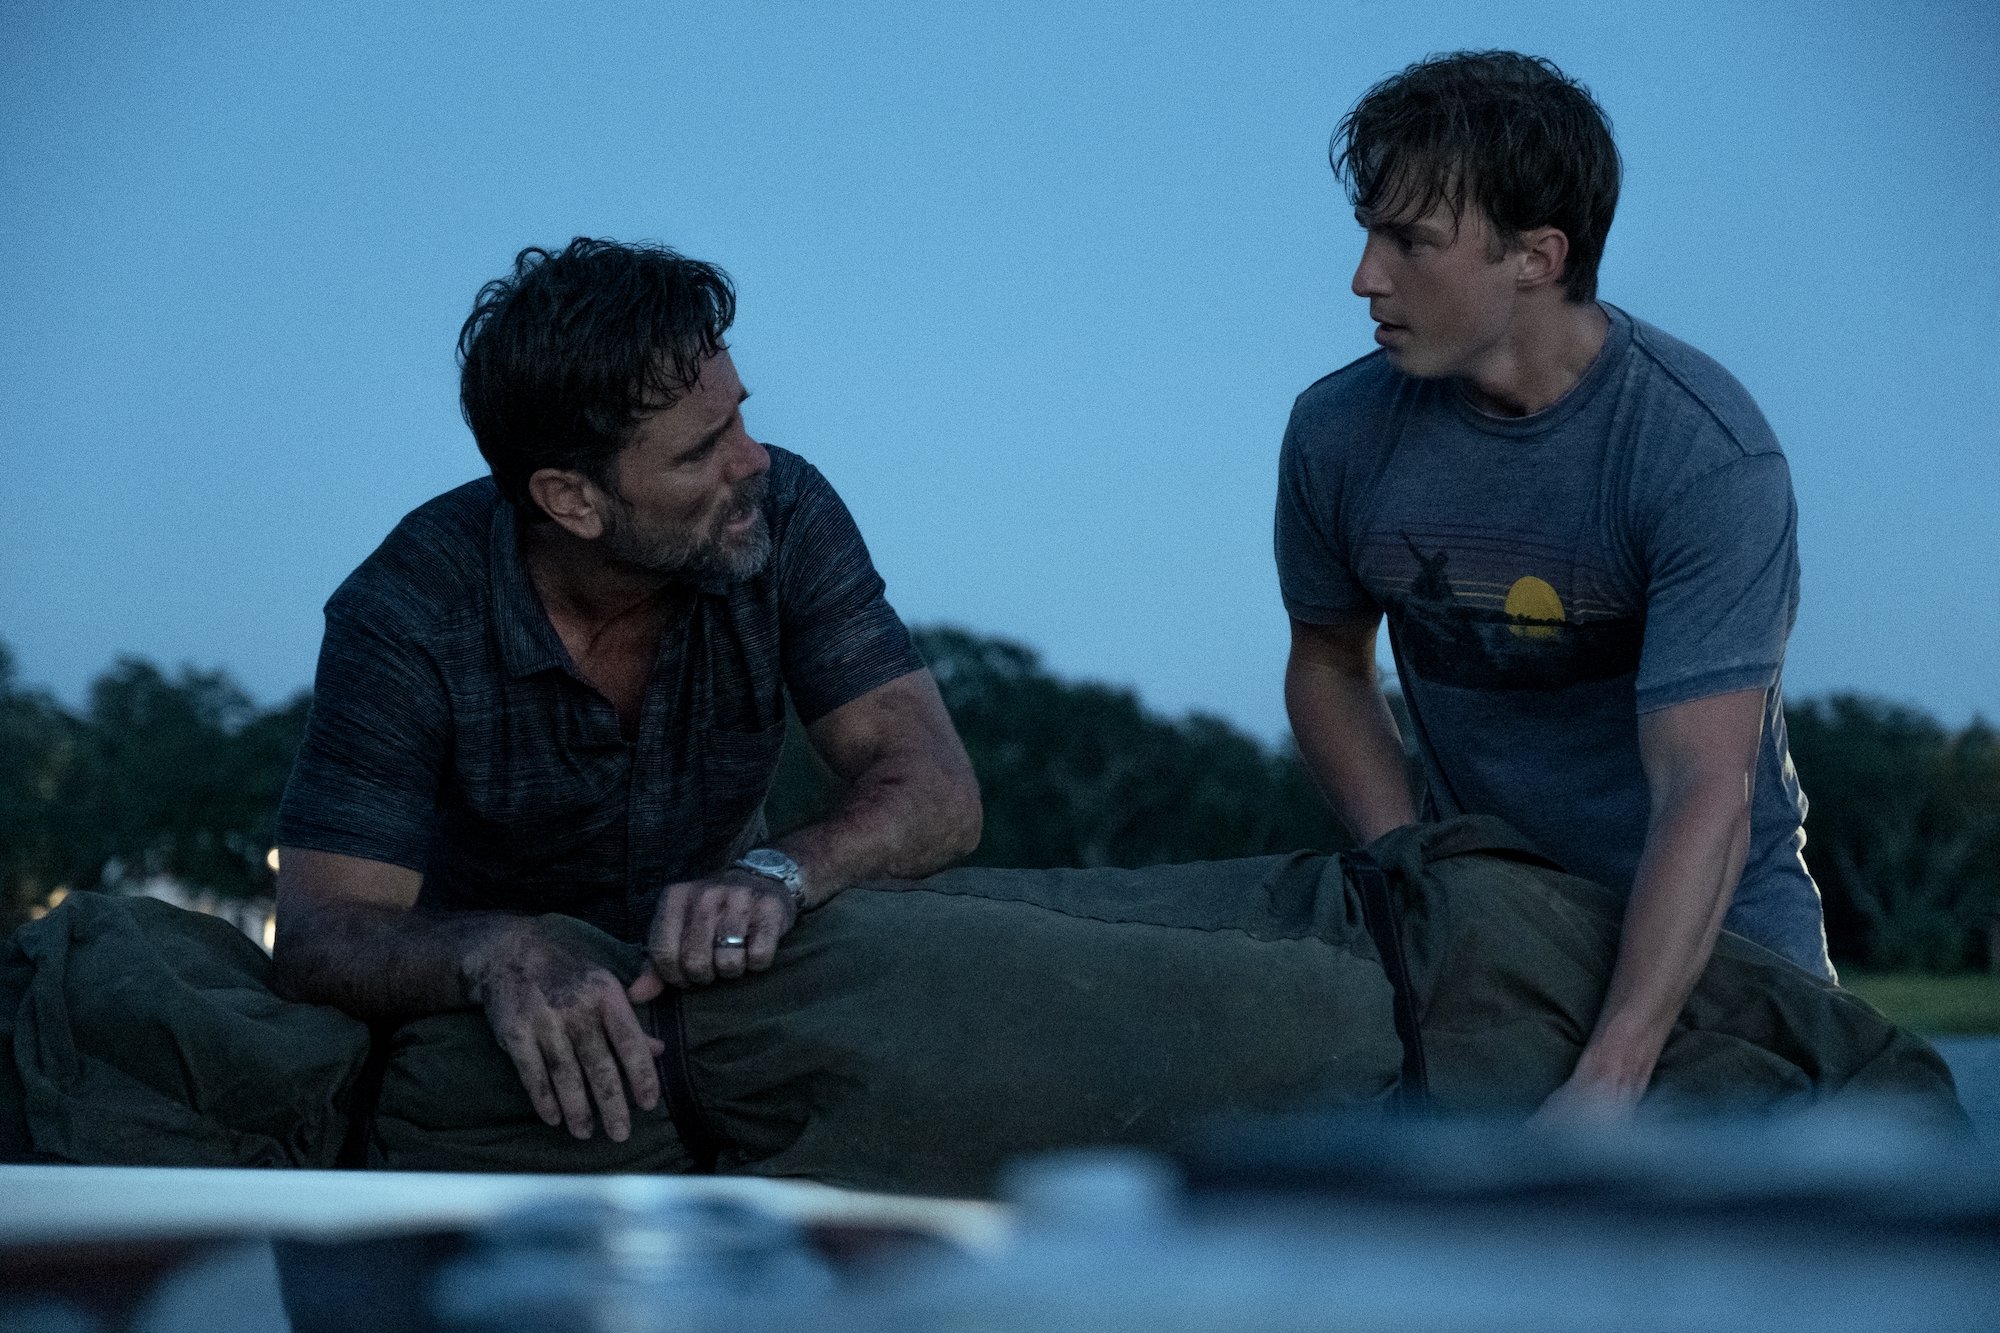 CHARLES ESTEN as WARD CAMERON and DREW STARKEY as RAFE in episode 202 of OUTER BANKS Season 2